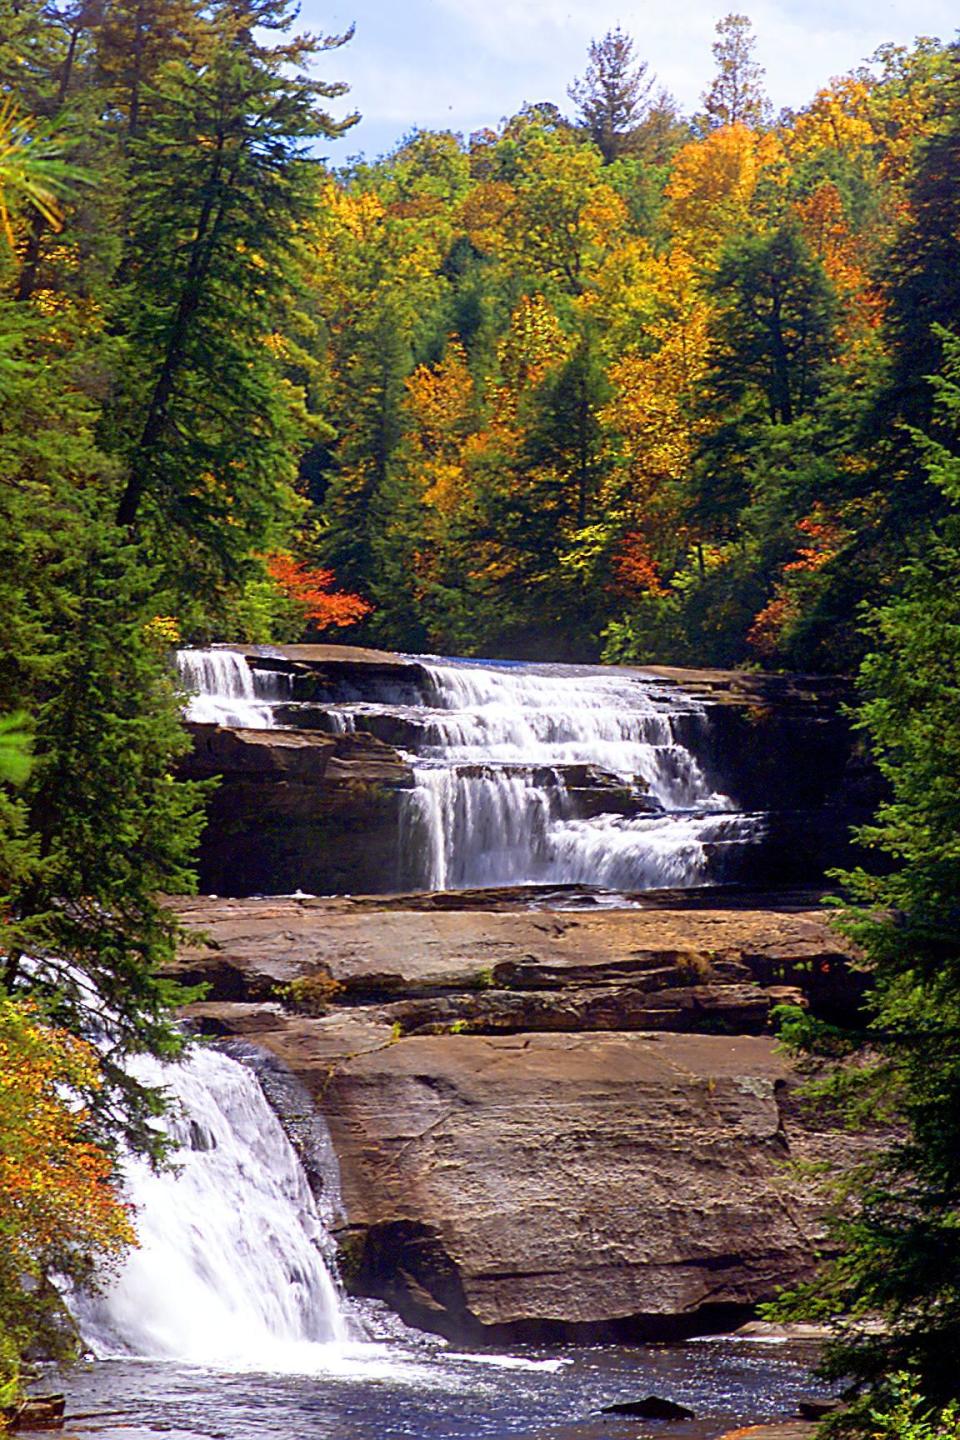 Triple Falls in DuPont State Forest was named one of the top fall hikes on AllTrails 2023 list for North Carolina.